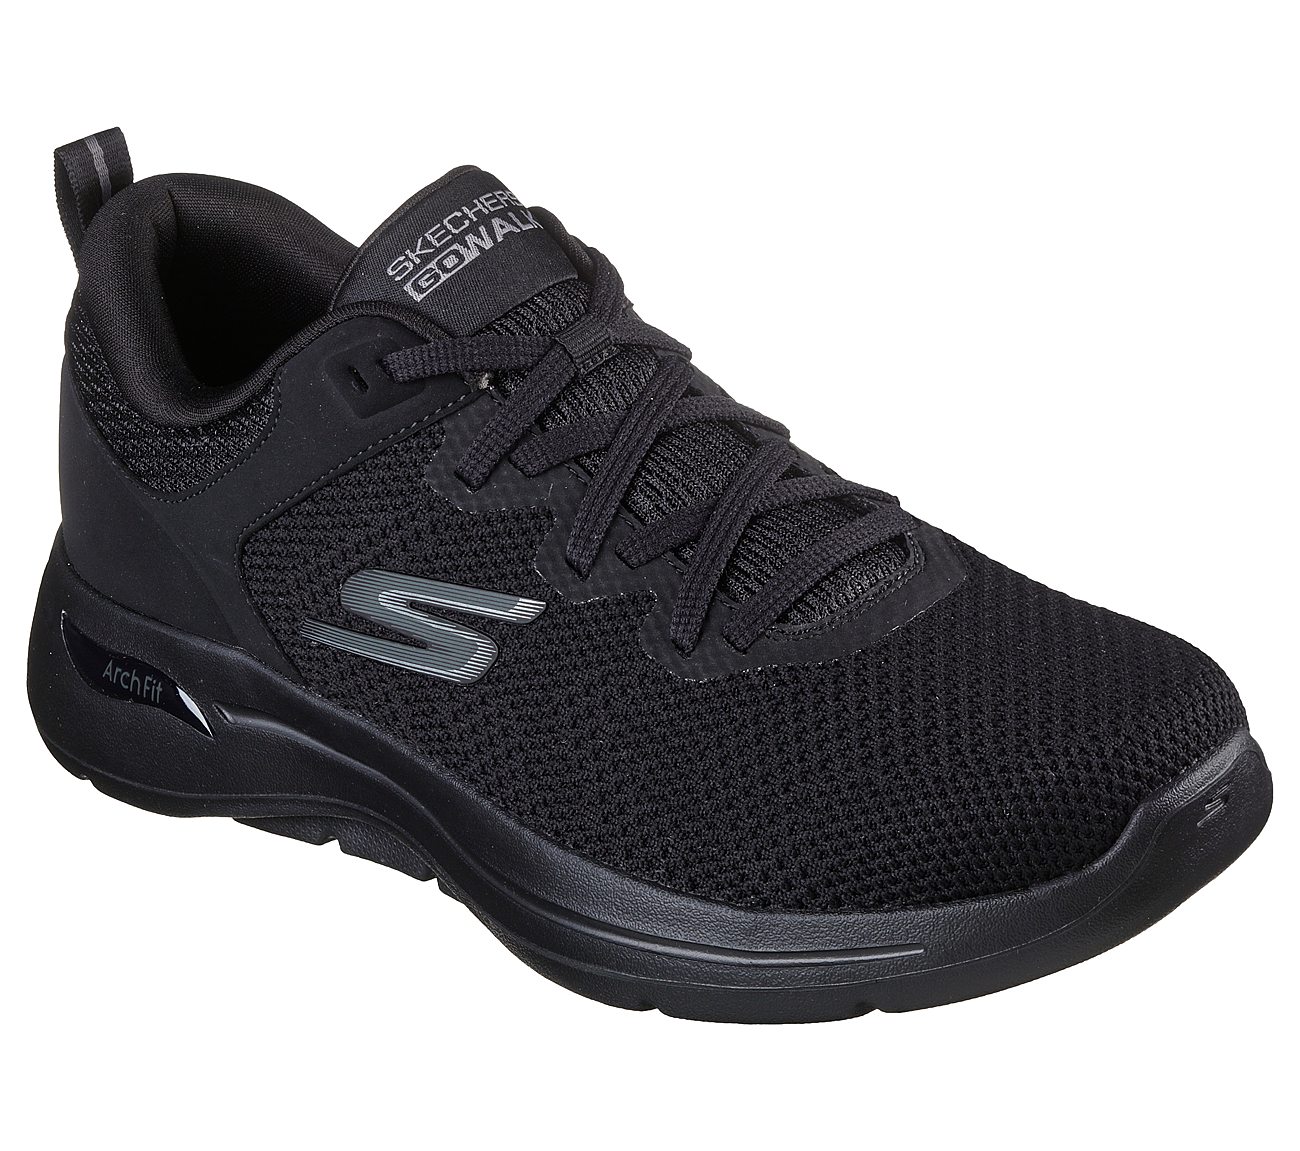 Skechers Black Go Walk Arch Fit Clinton Mens Lace Up Shoes Style ID ...